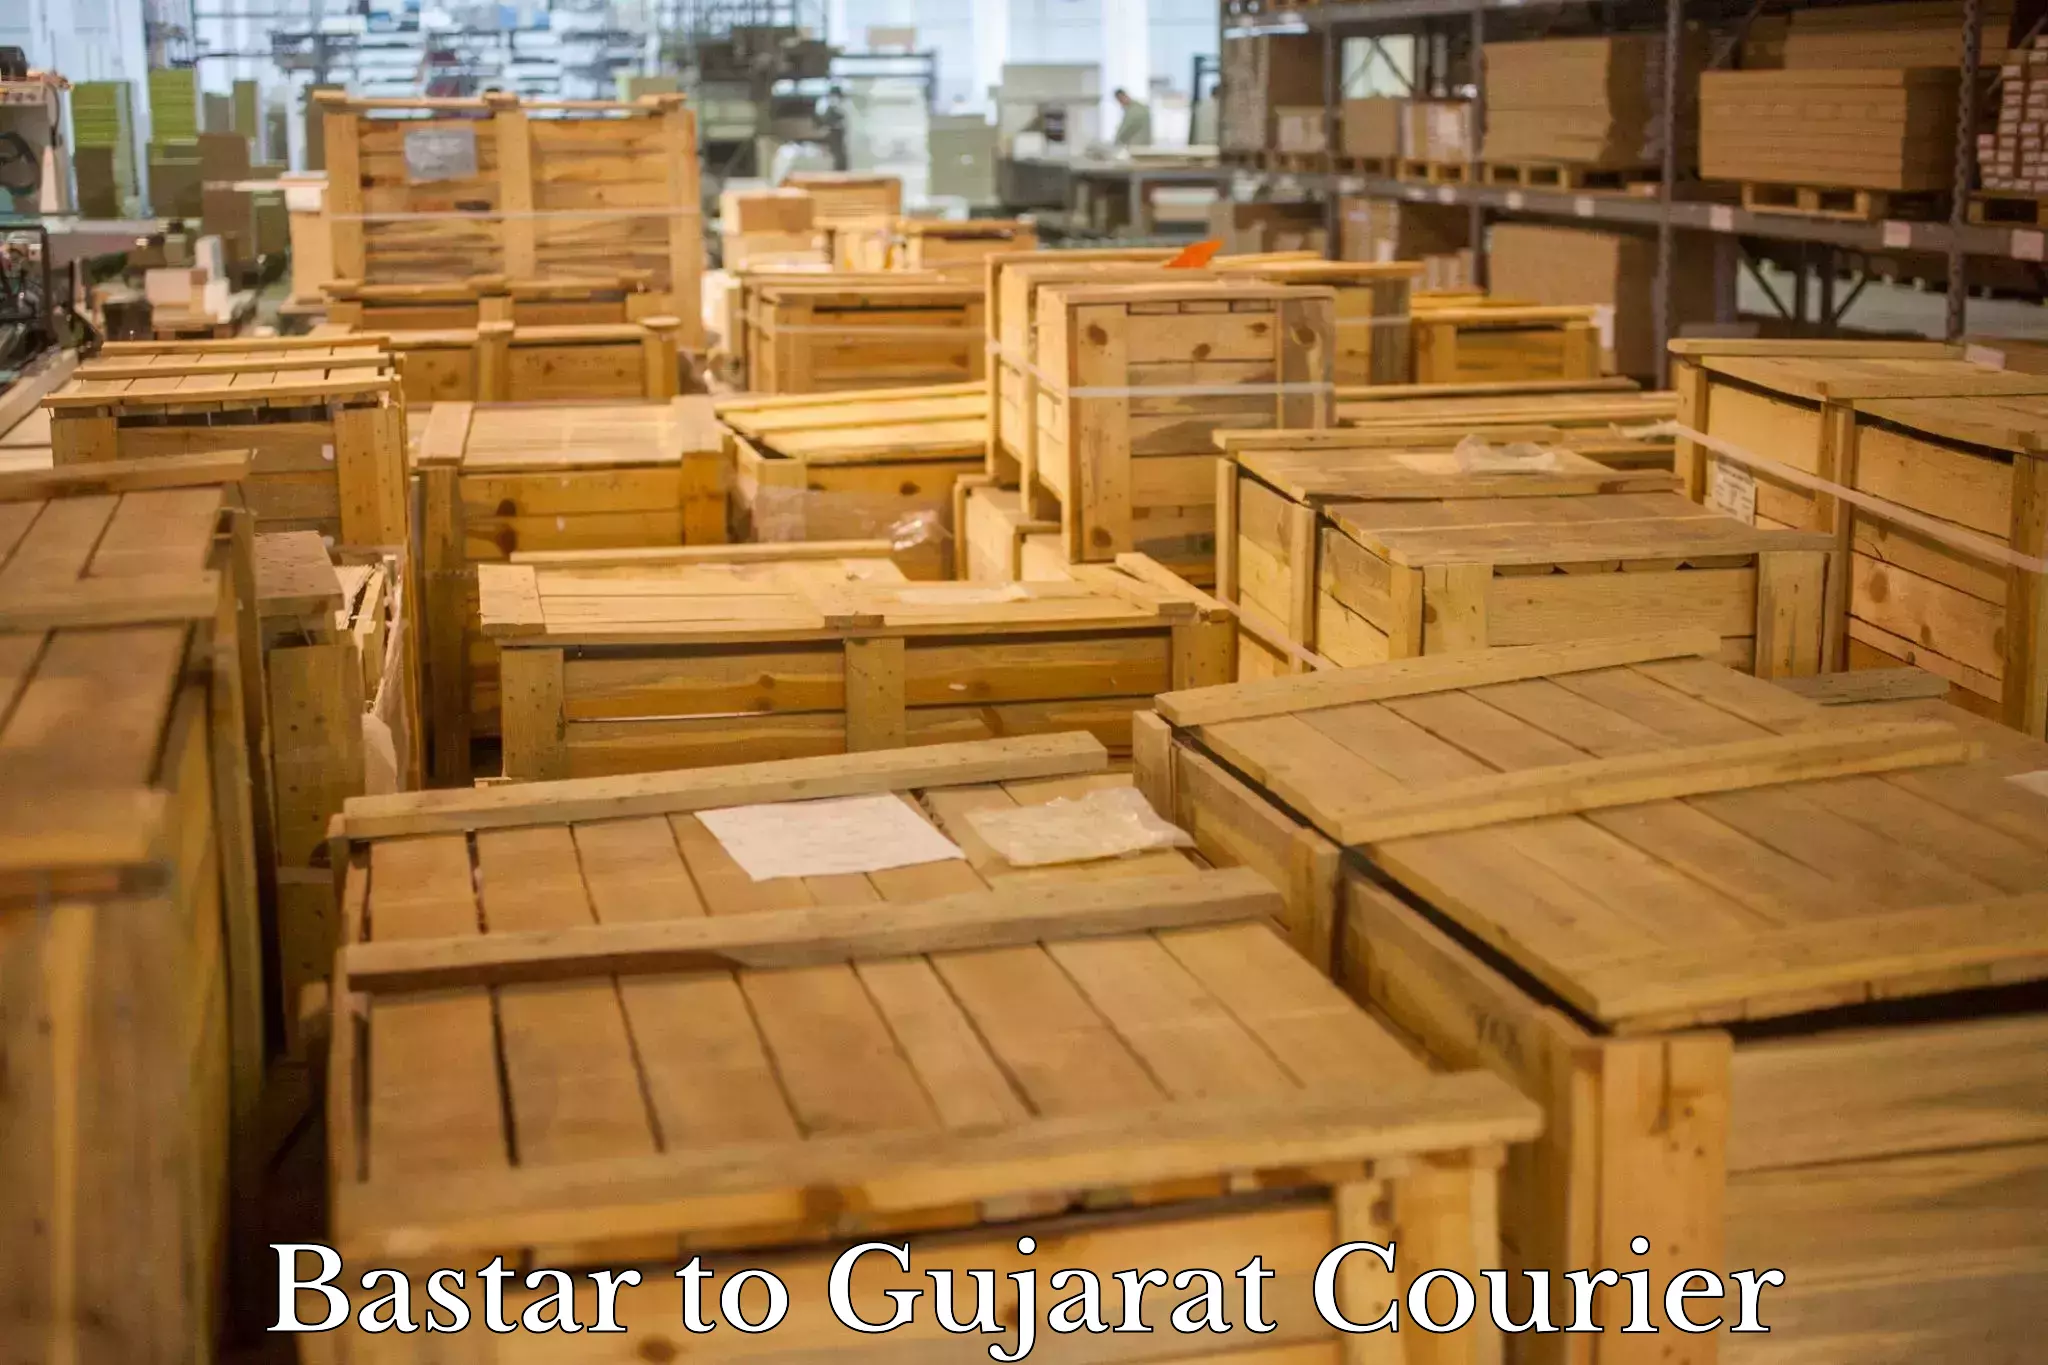 Business delivery service Bastar to Gujarat